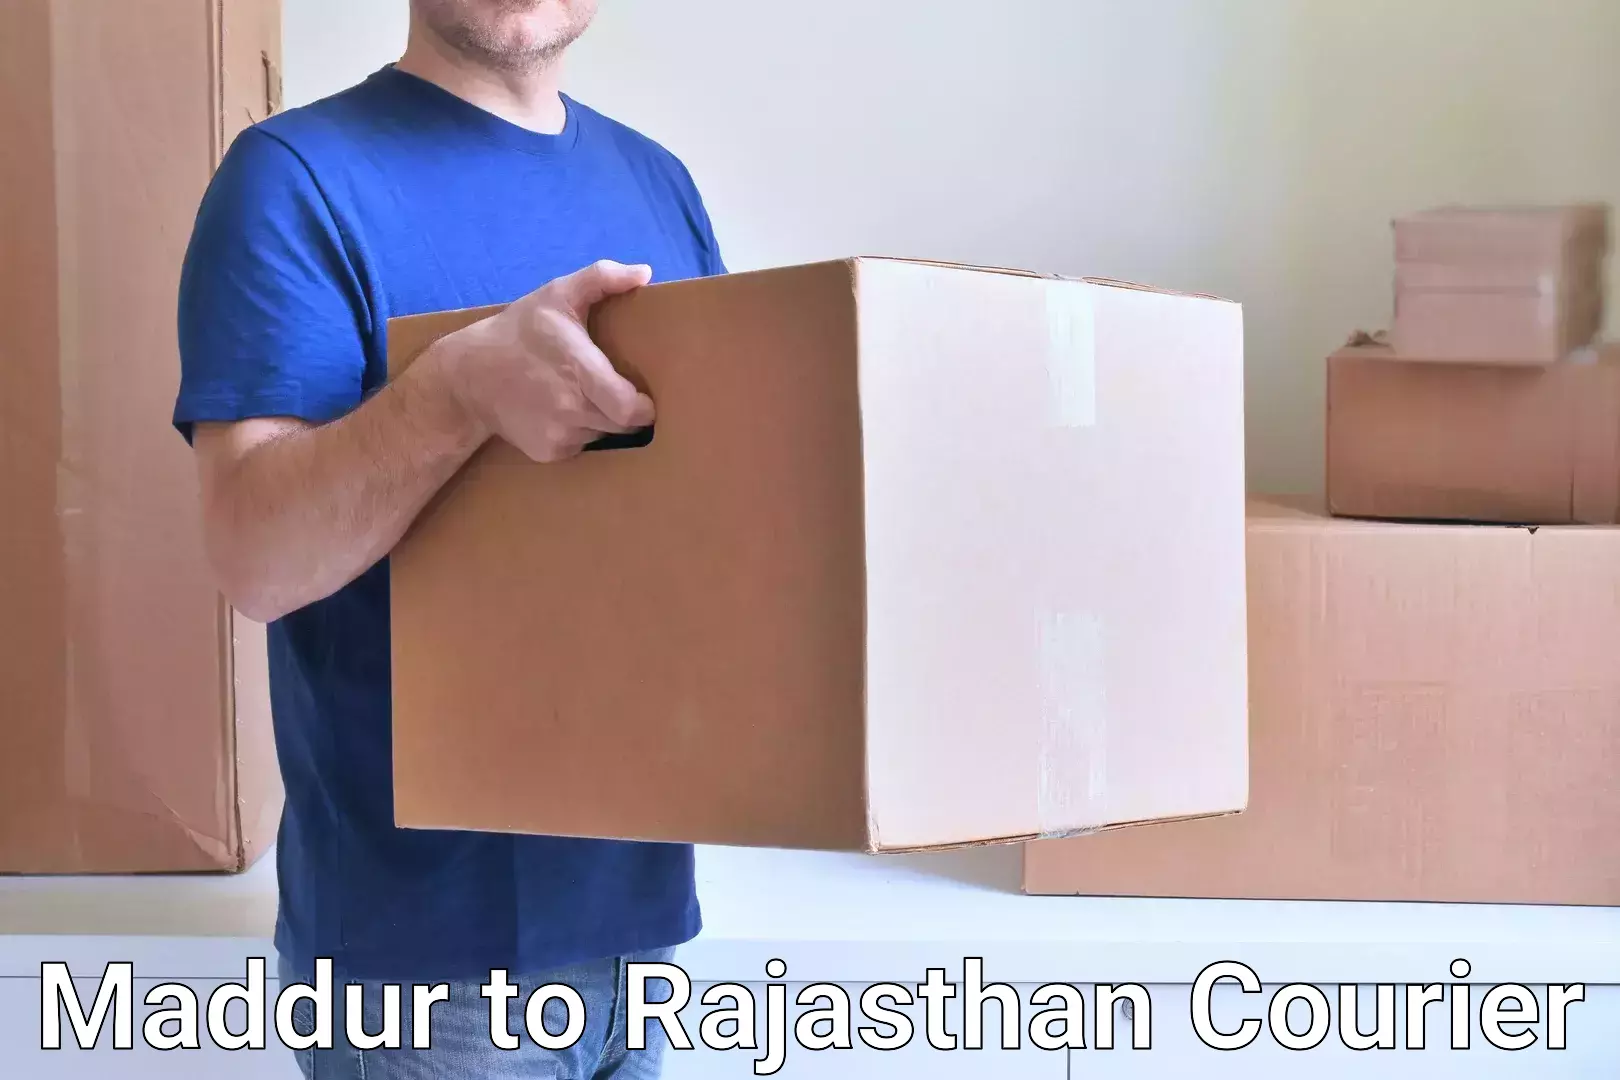 Bulk shipping discounts Maddur to Yeswanthapur